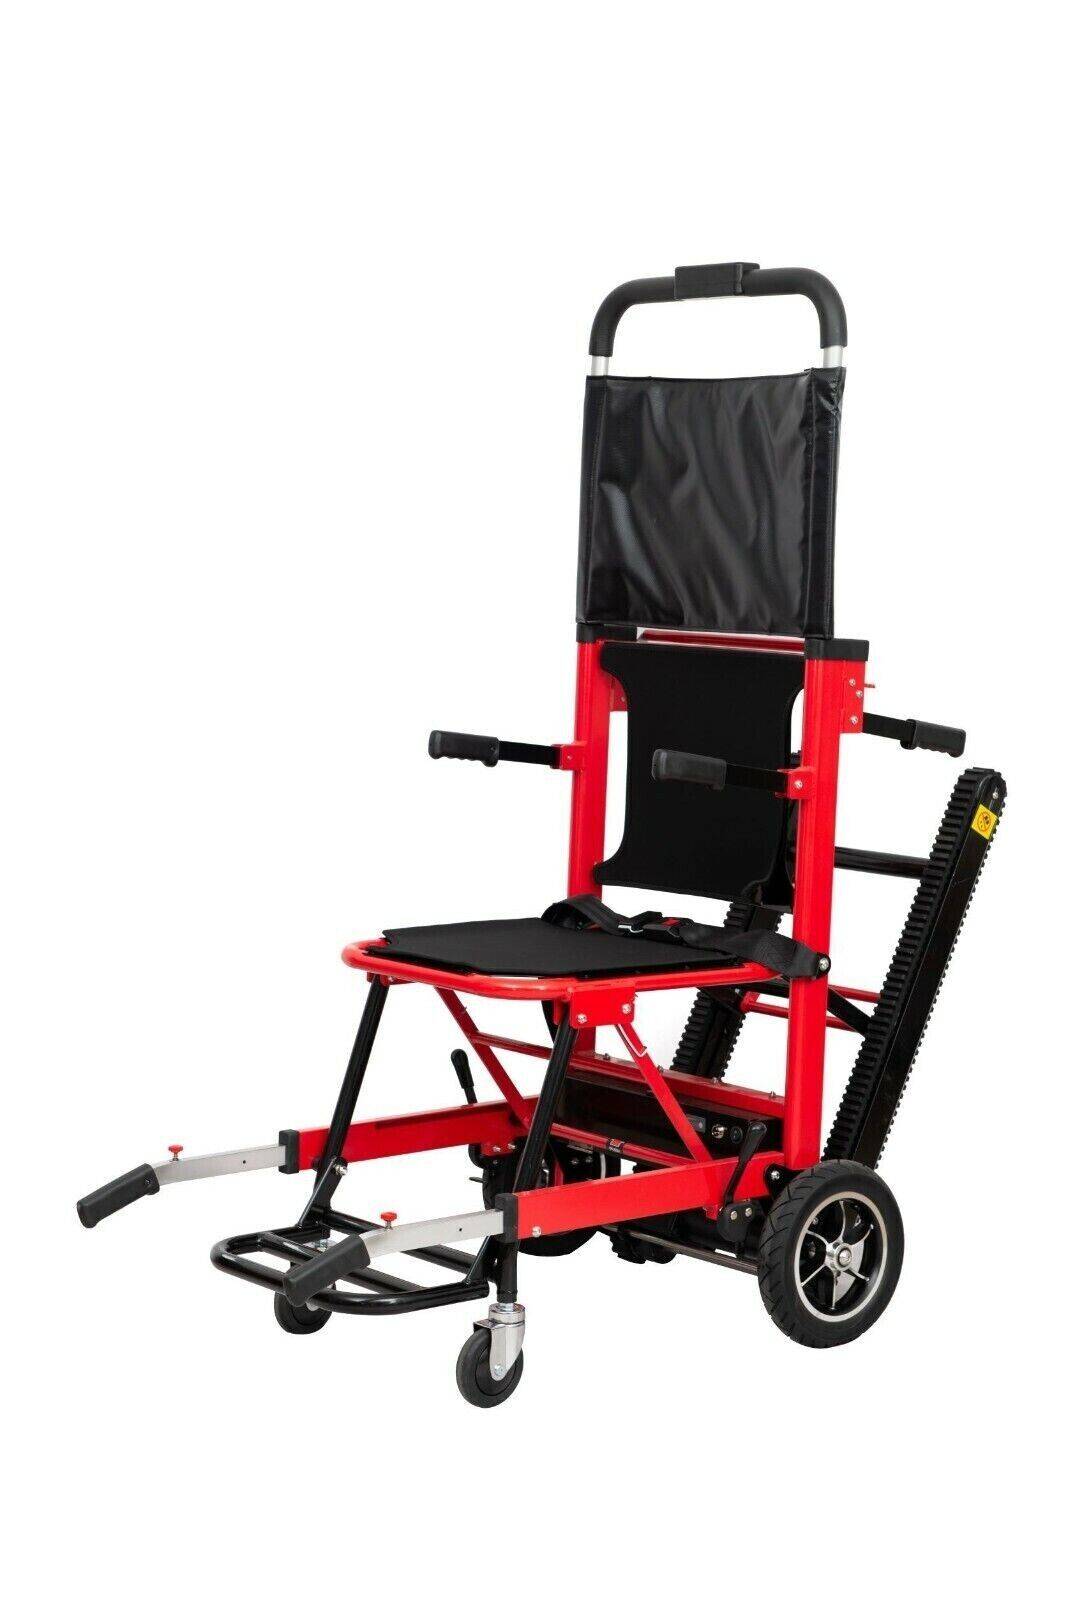 LINE2design Motorized Mobile Stair Lift Climber- Red - USED